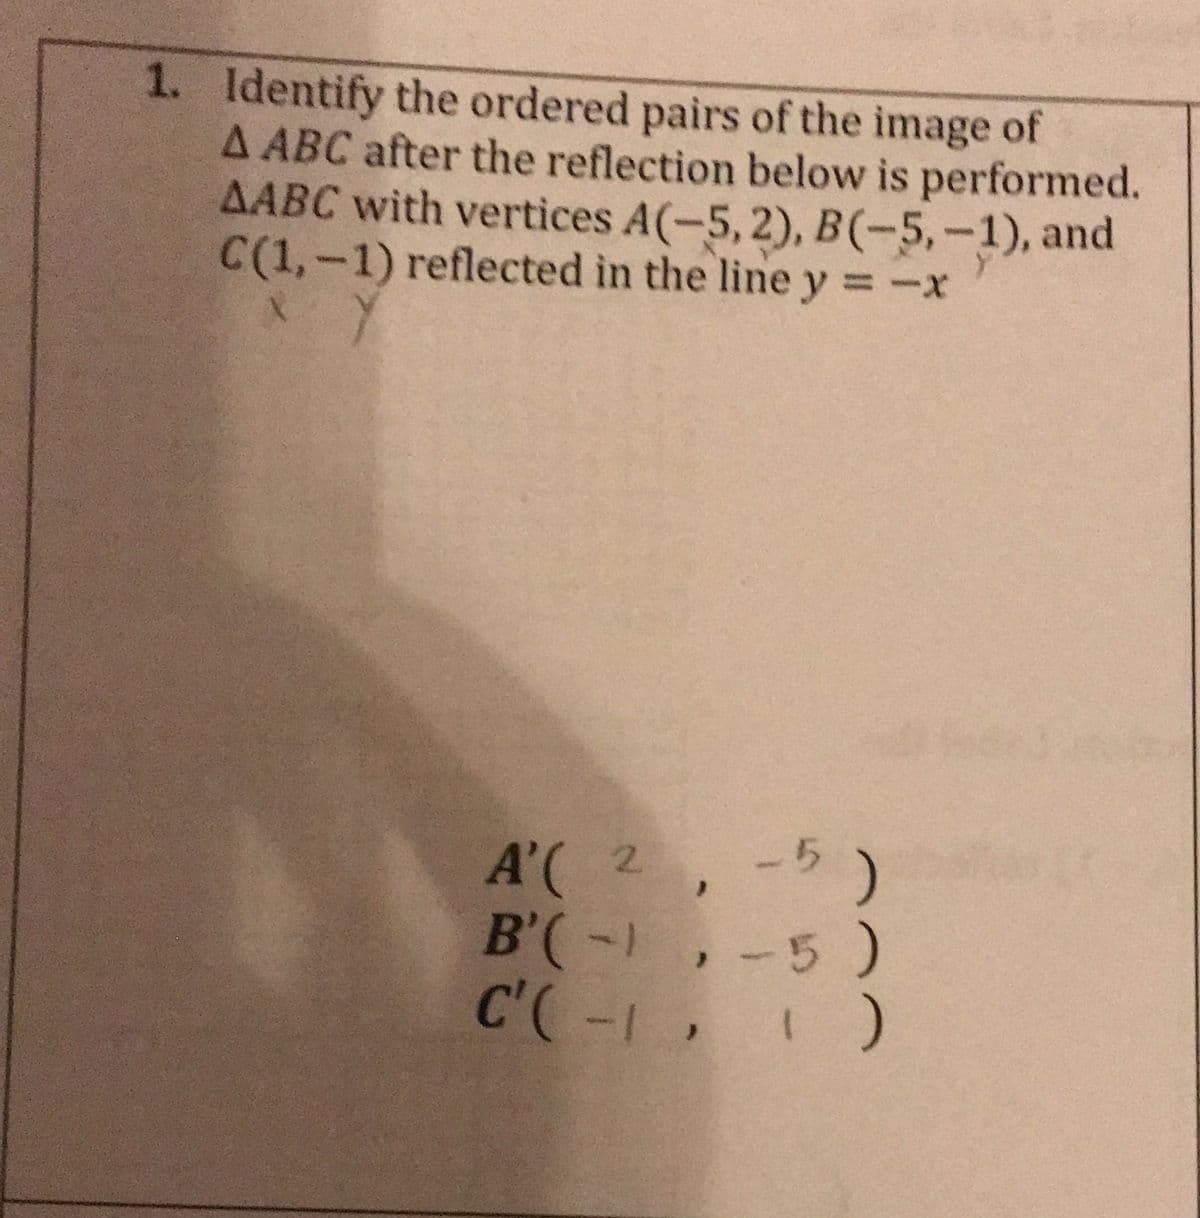 1. Identify the ordered pairs of the image of
A ABC after the reflection below is performed.
AABC with vertices A(-5,2), B(-5,-1), and
C(1,-1) reflected in the line y = -x
A'(2
B'(-,-5)
C'(-1, )
-5)
